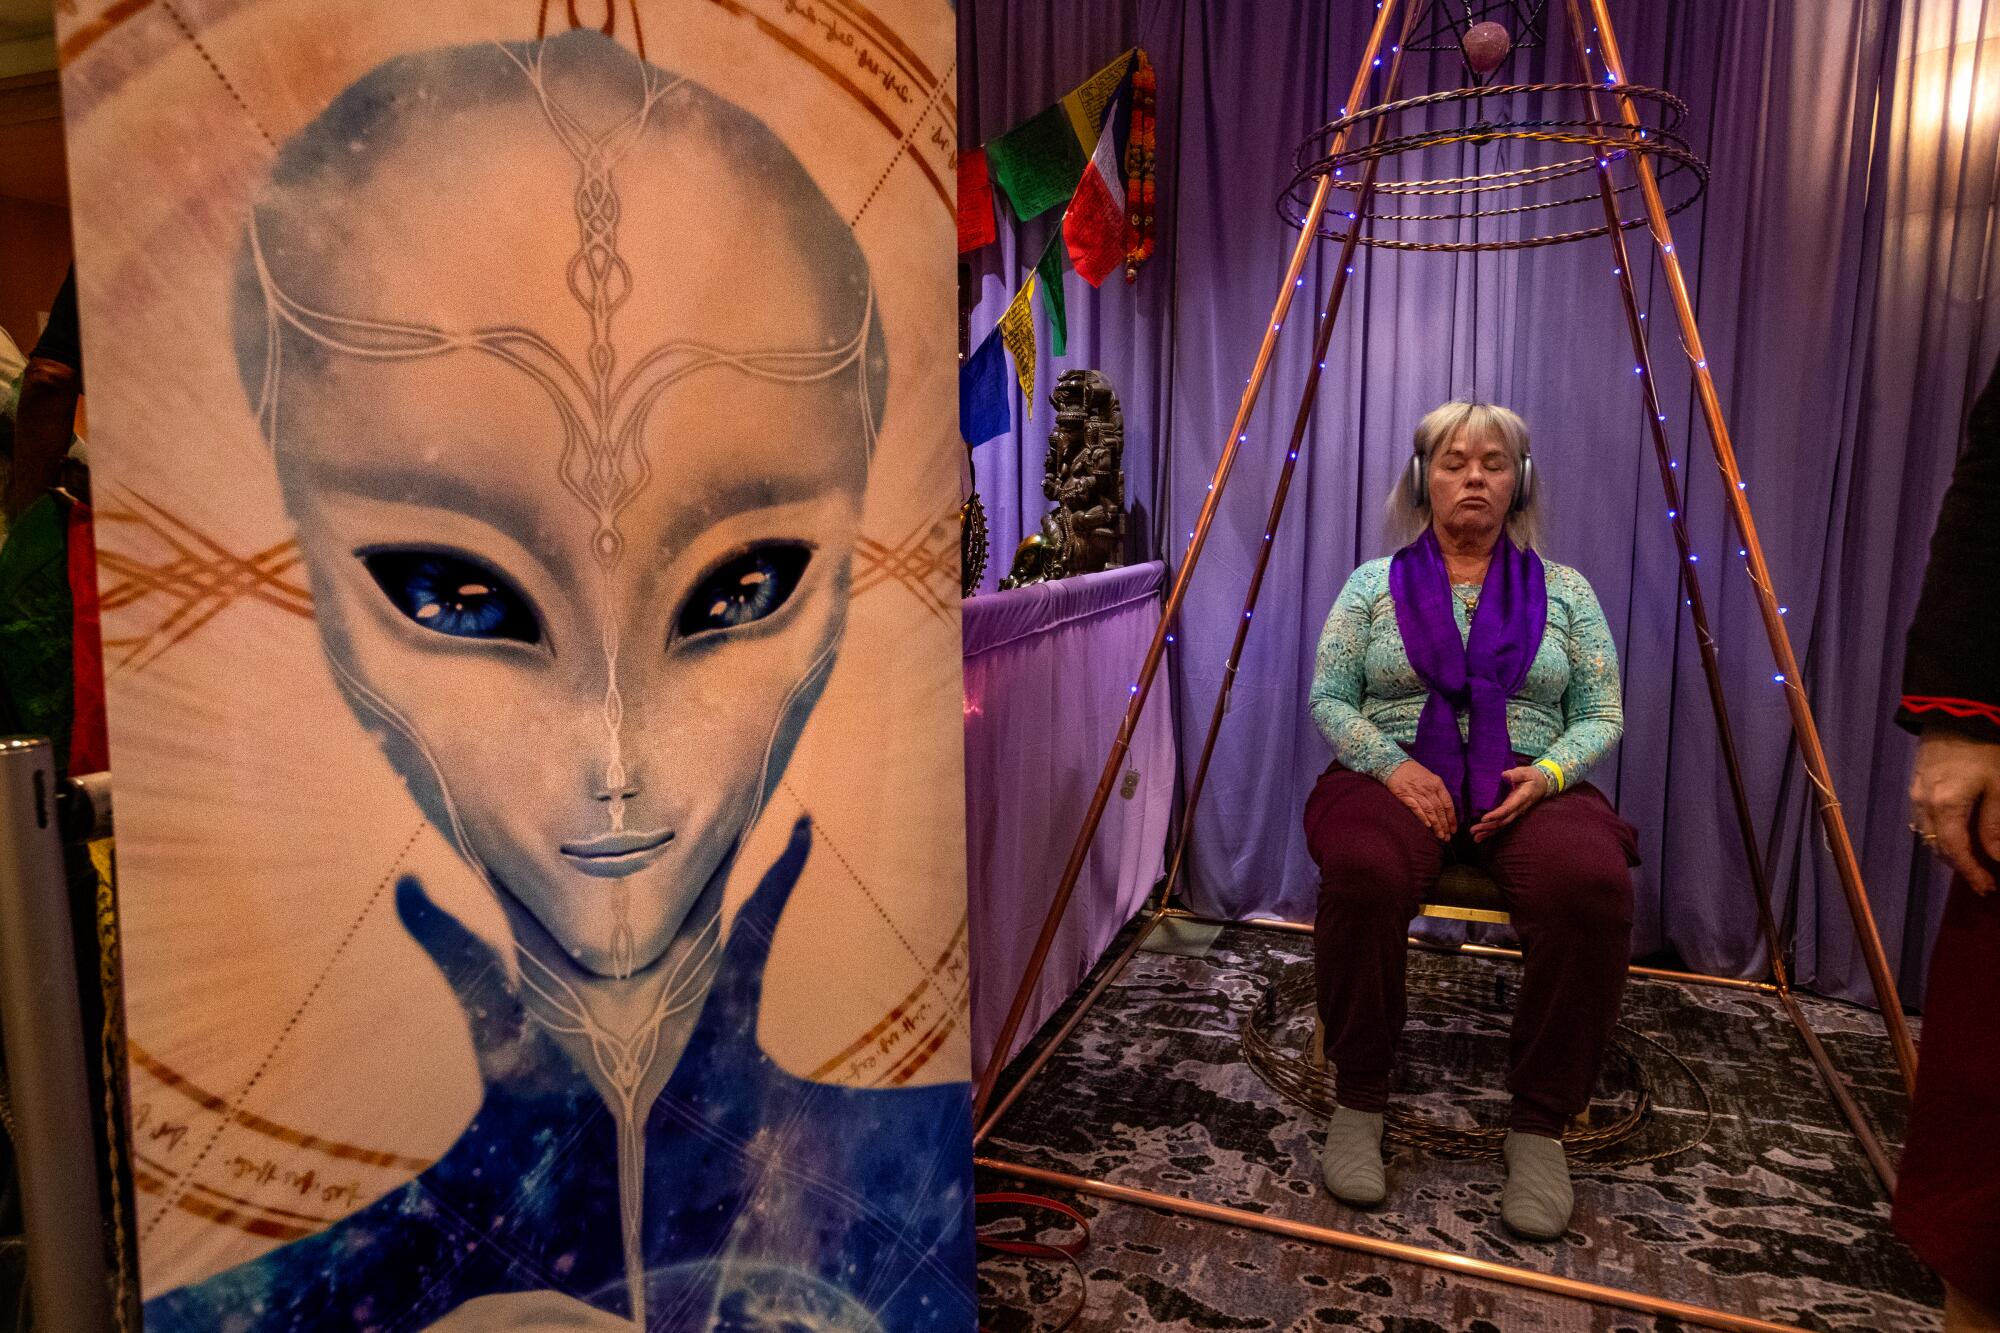 Carol Chappell, from Sedona, Ariz., sits inside a pyramidal structure next to a large drawing of an alien